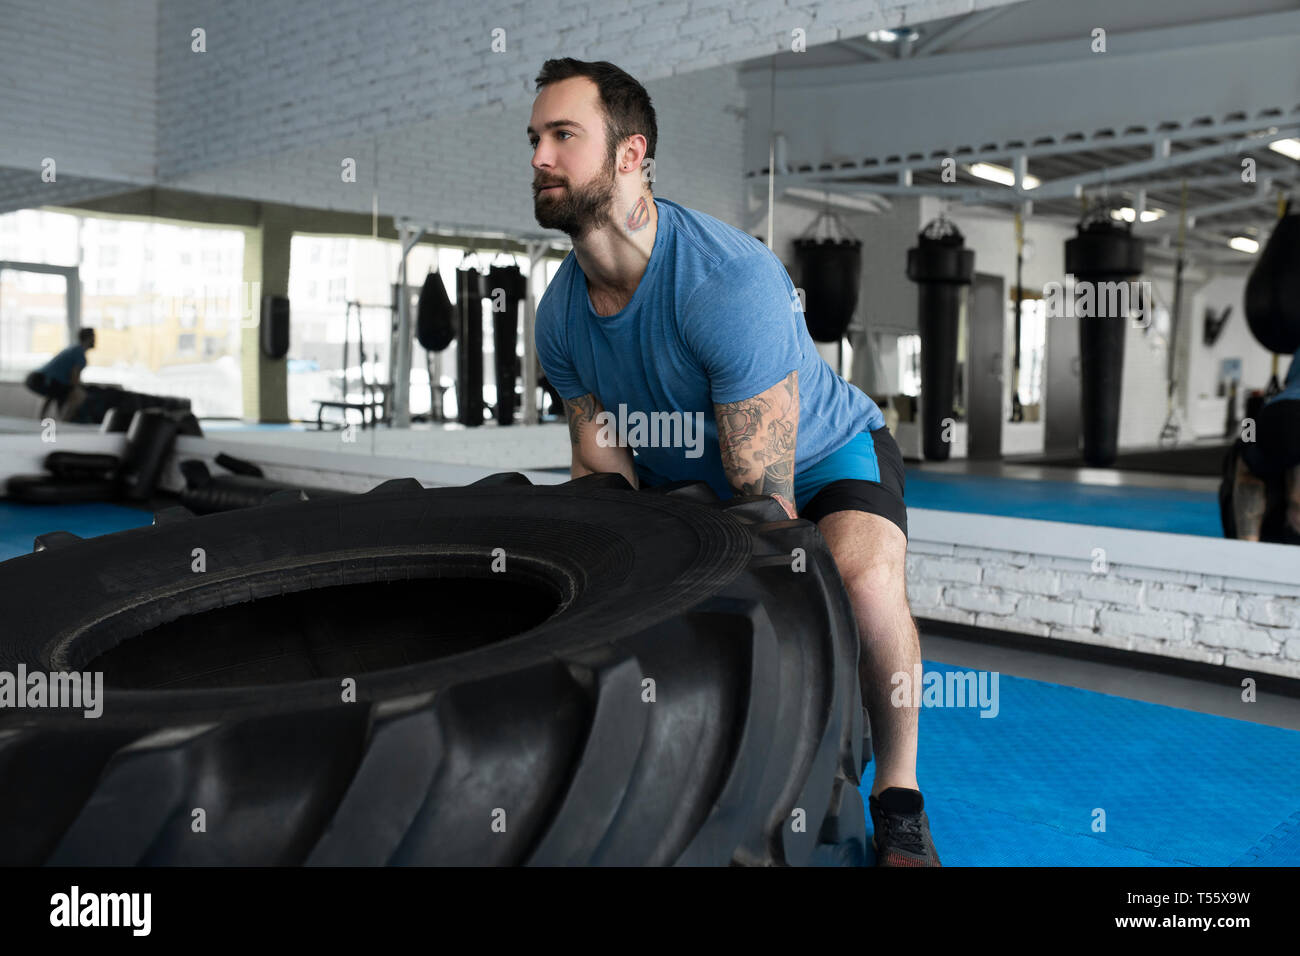 Mid adult man lifting tire in gym Stock Photo